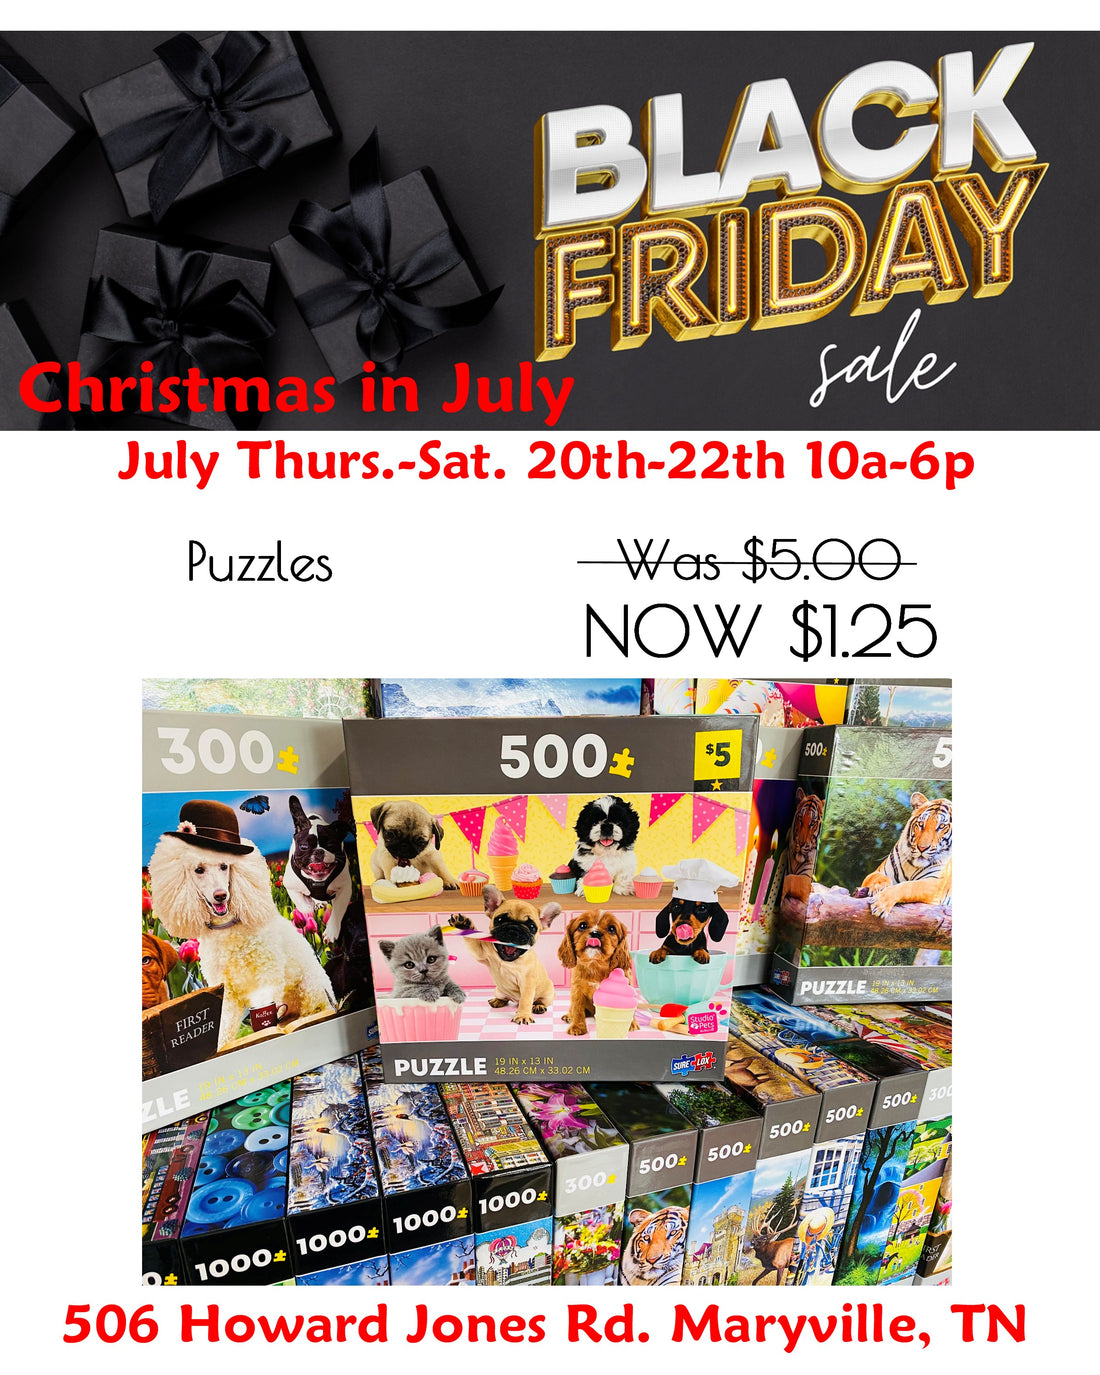 Black Friday in July Continues in Store!